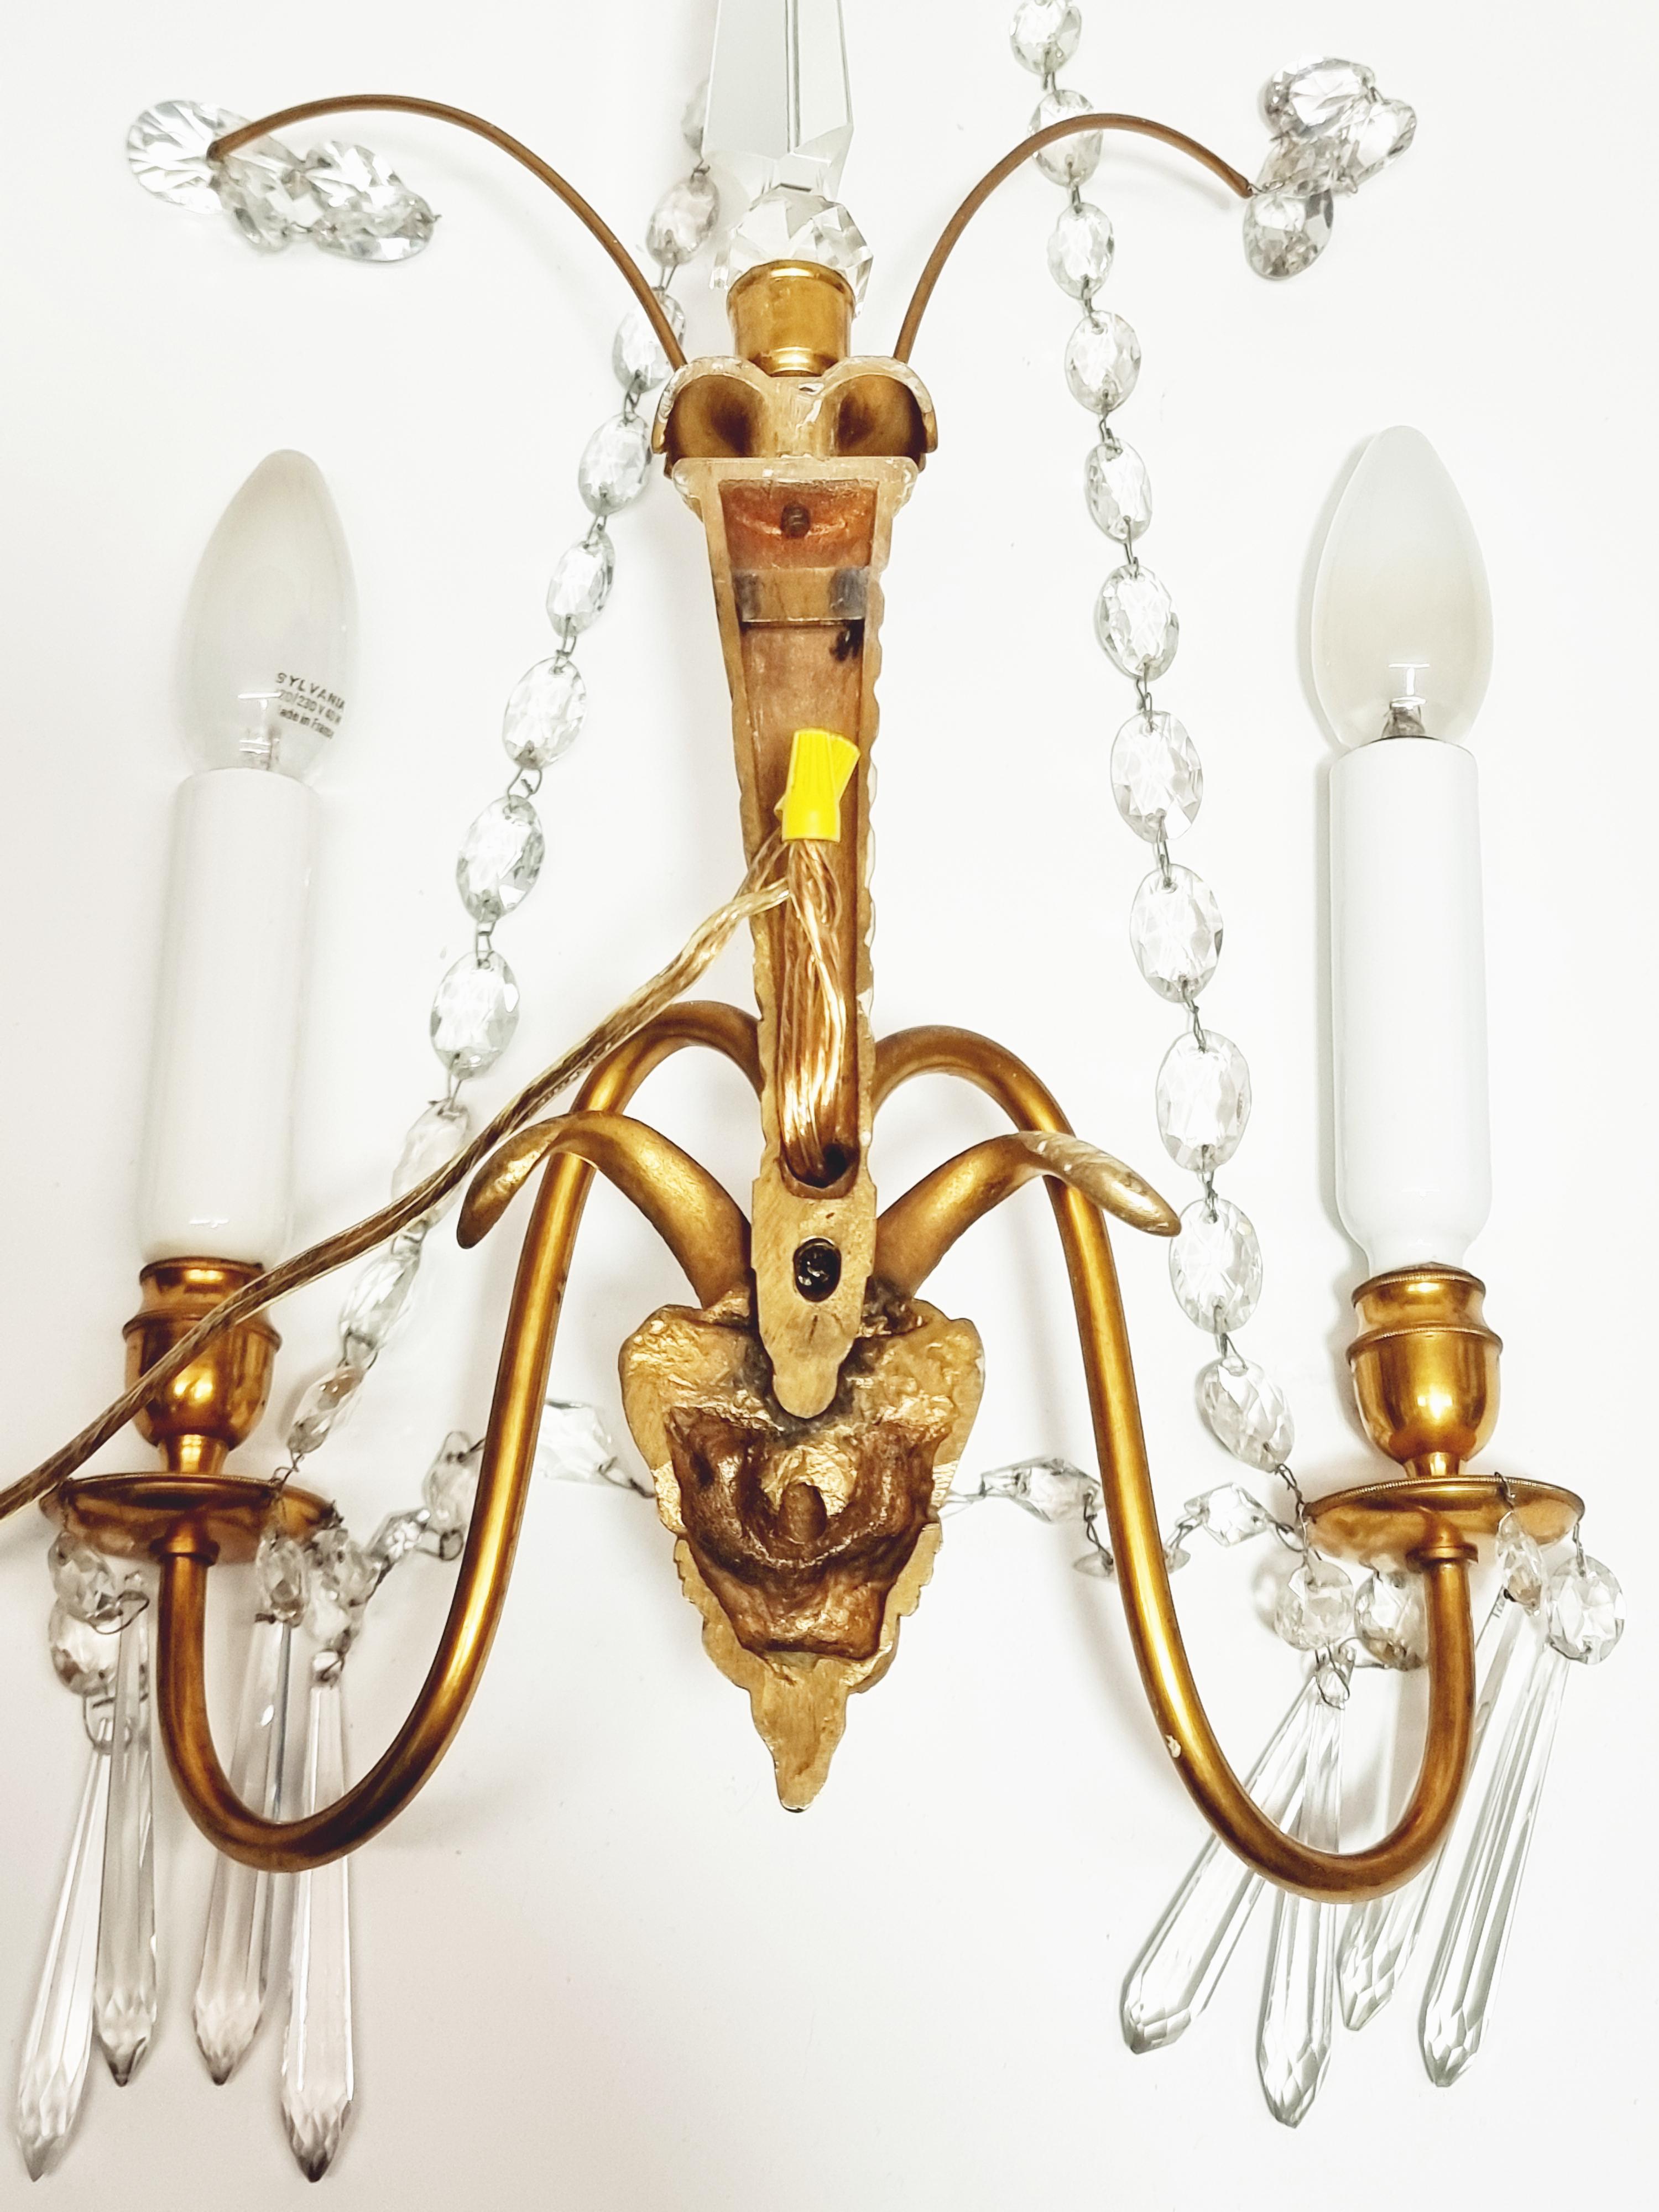 Pair of Baltic Gilt Satyr Faun Head Wall Sconces, Late 19th / Early 20th Century For Sale 5